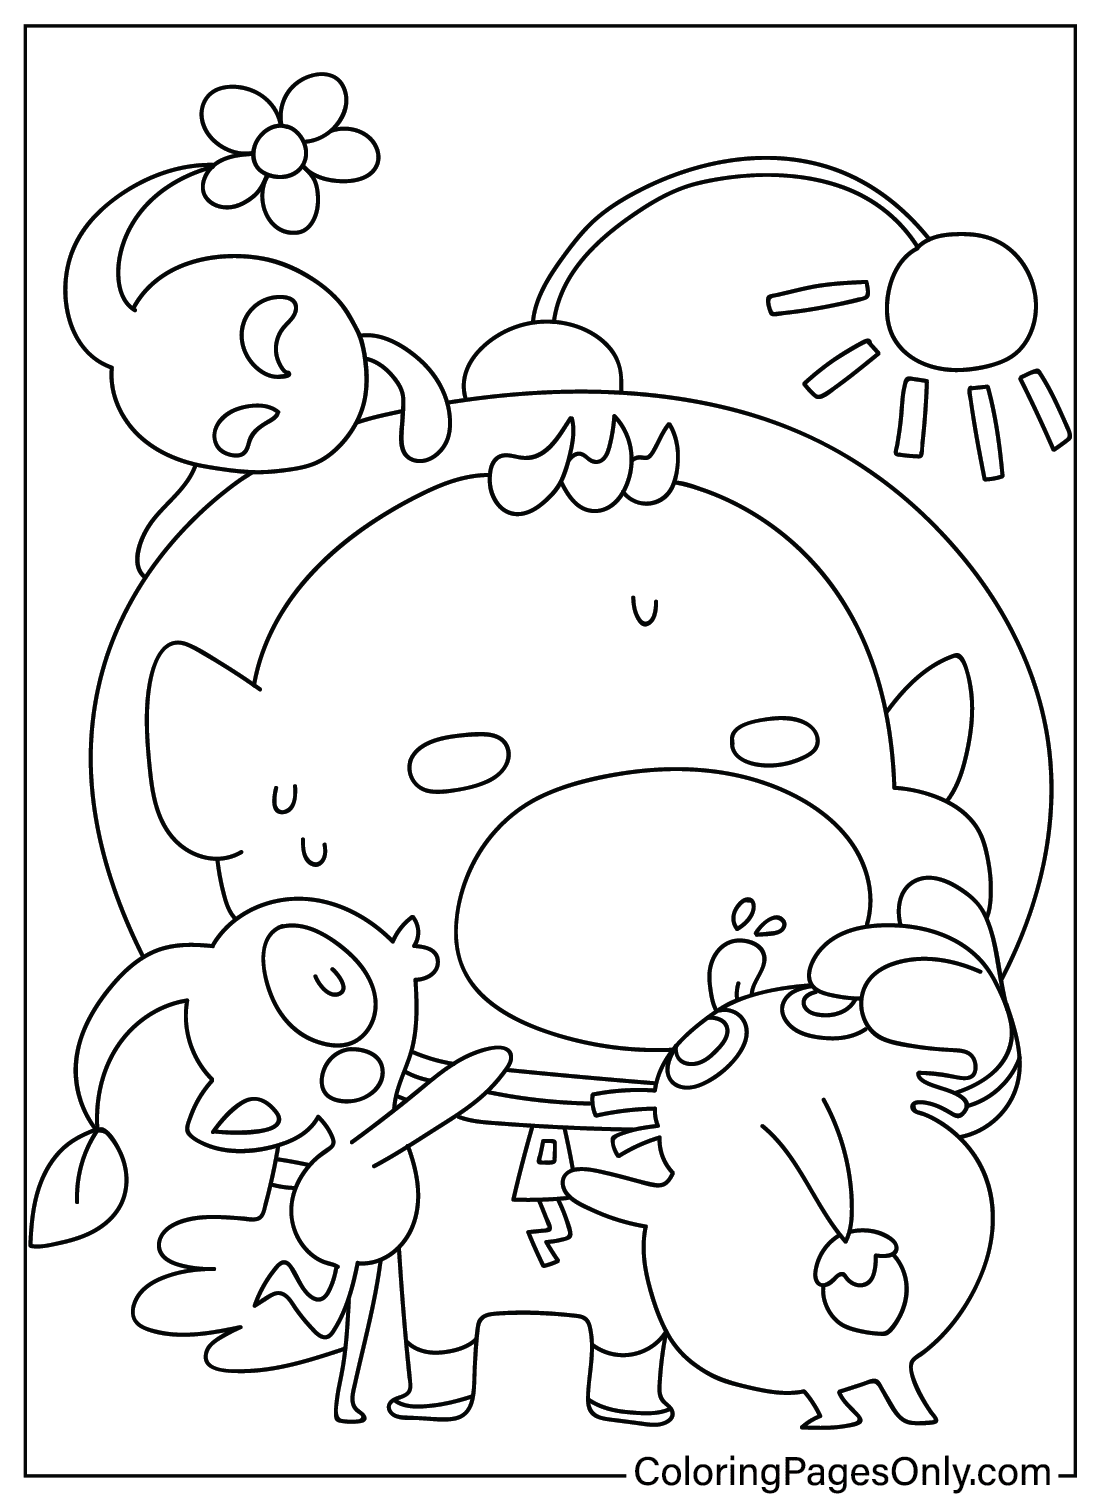 Free Printable Pikmin Coloring Page from Pikmin